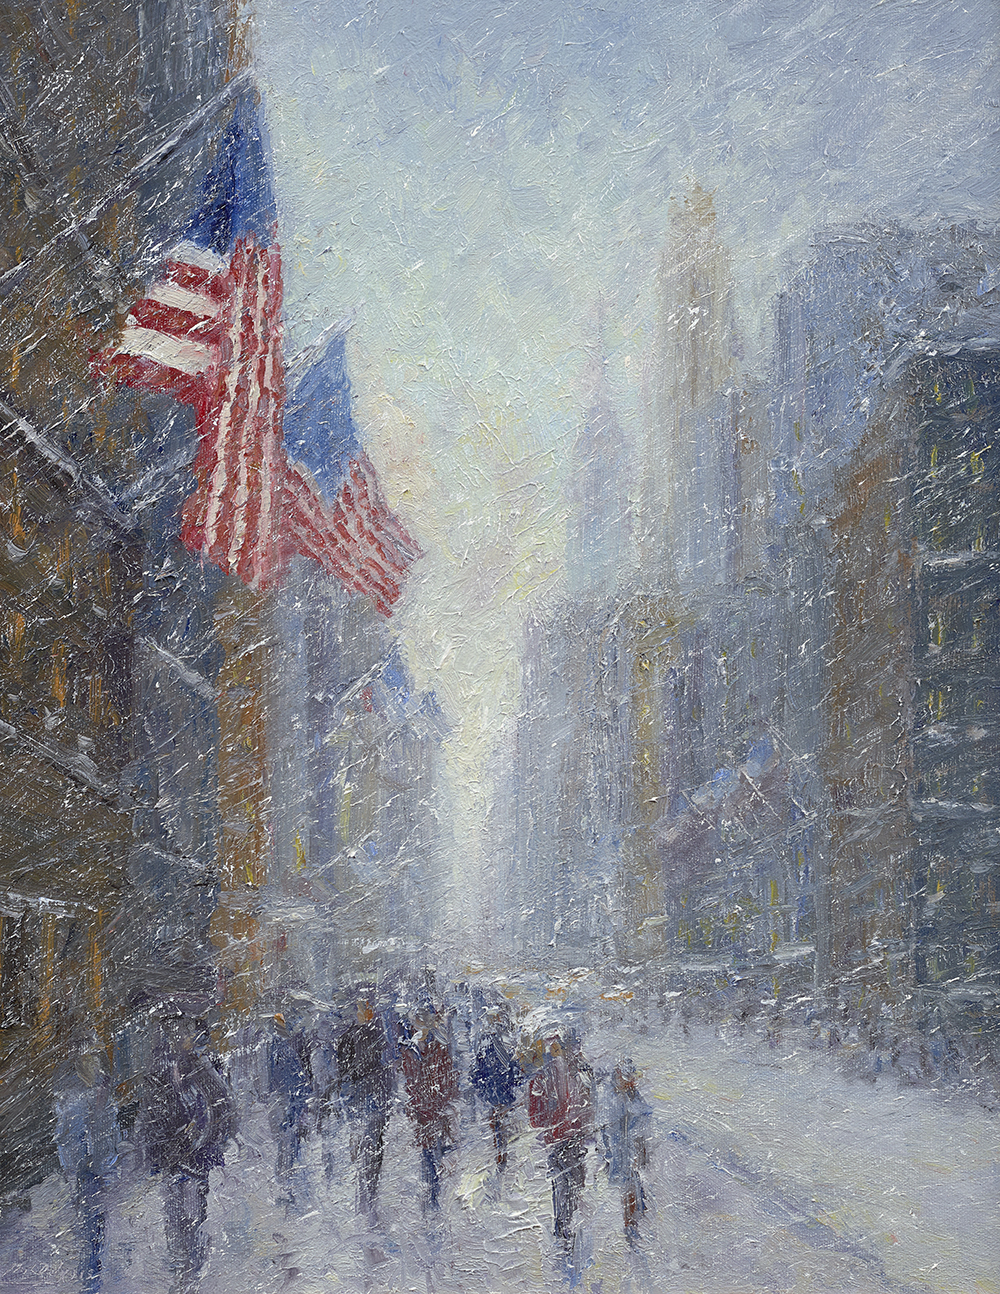 mark_daly_md1054_winter_flags.jpg